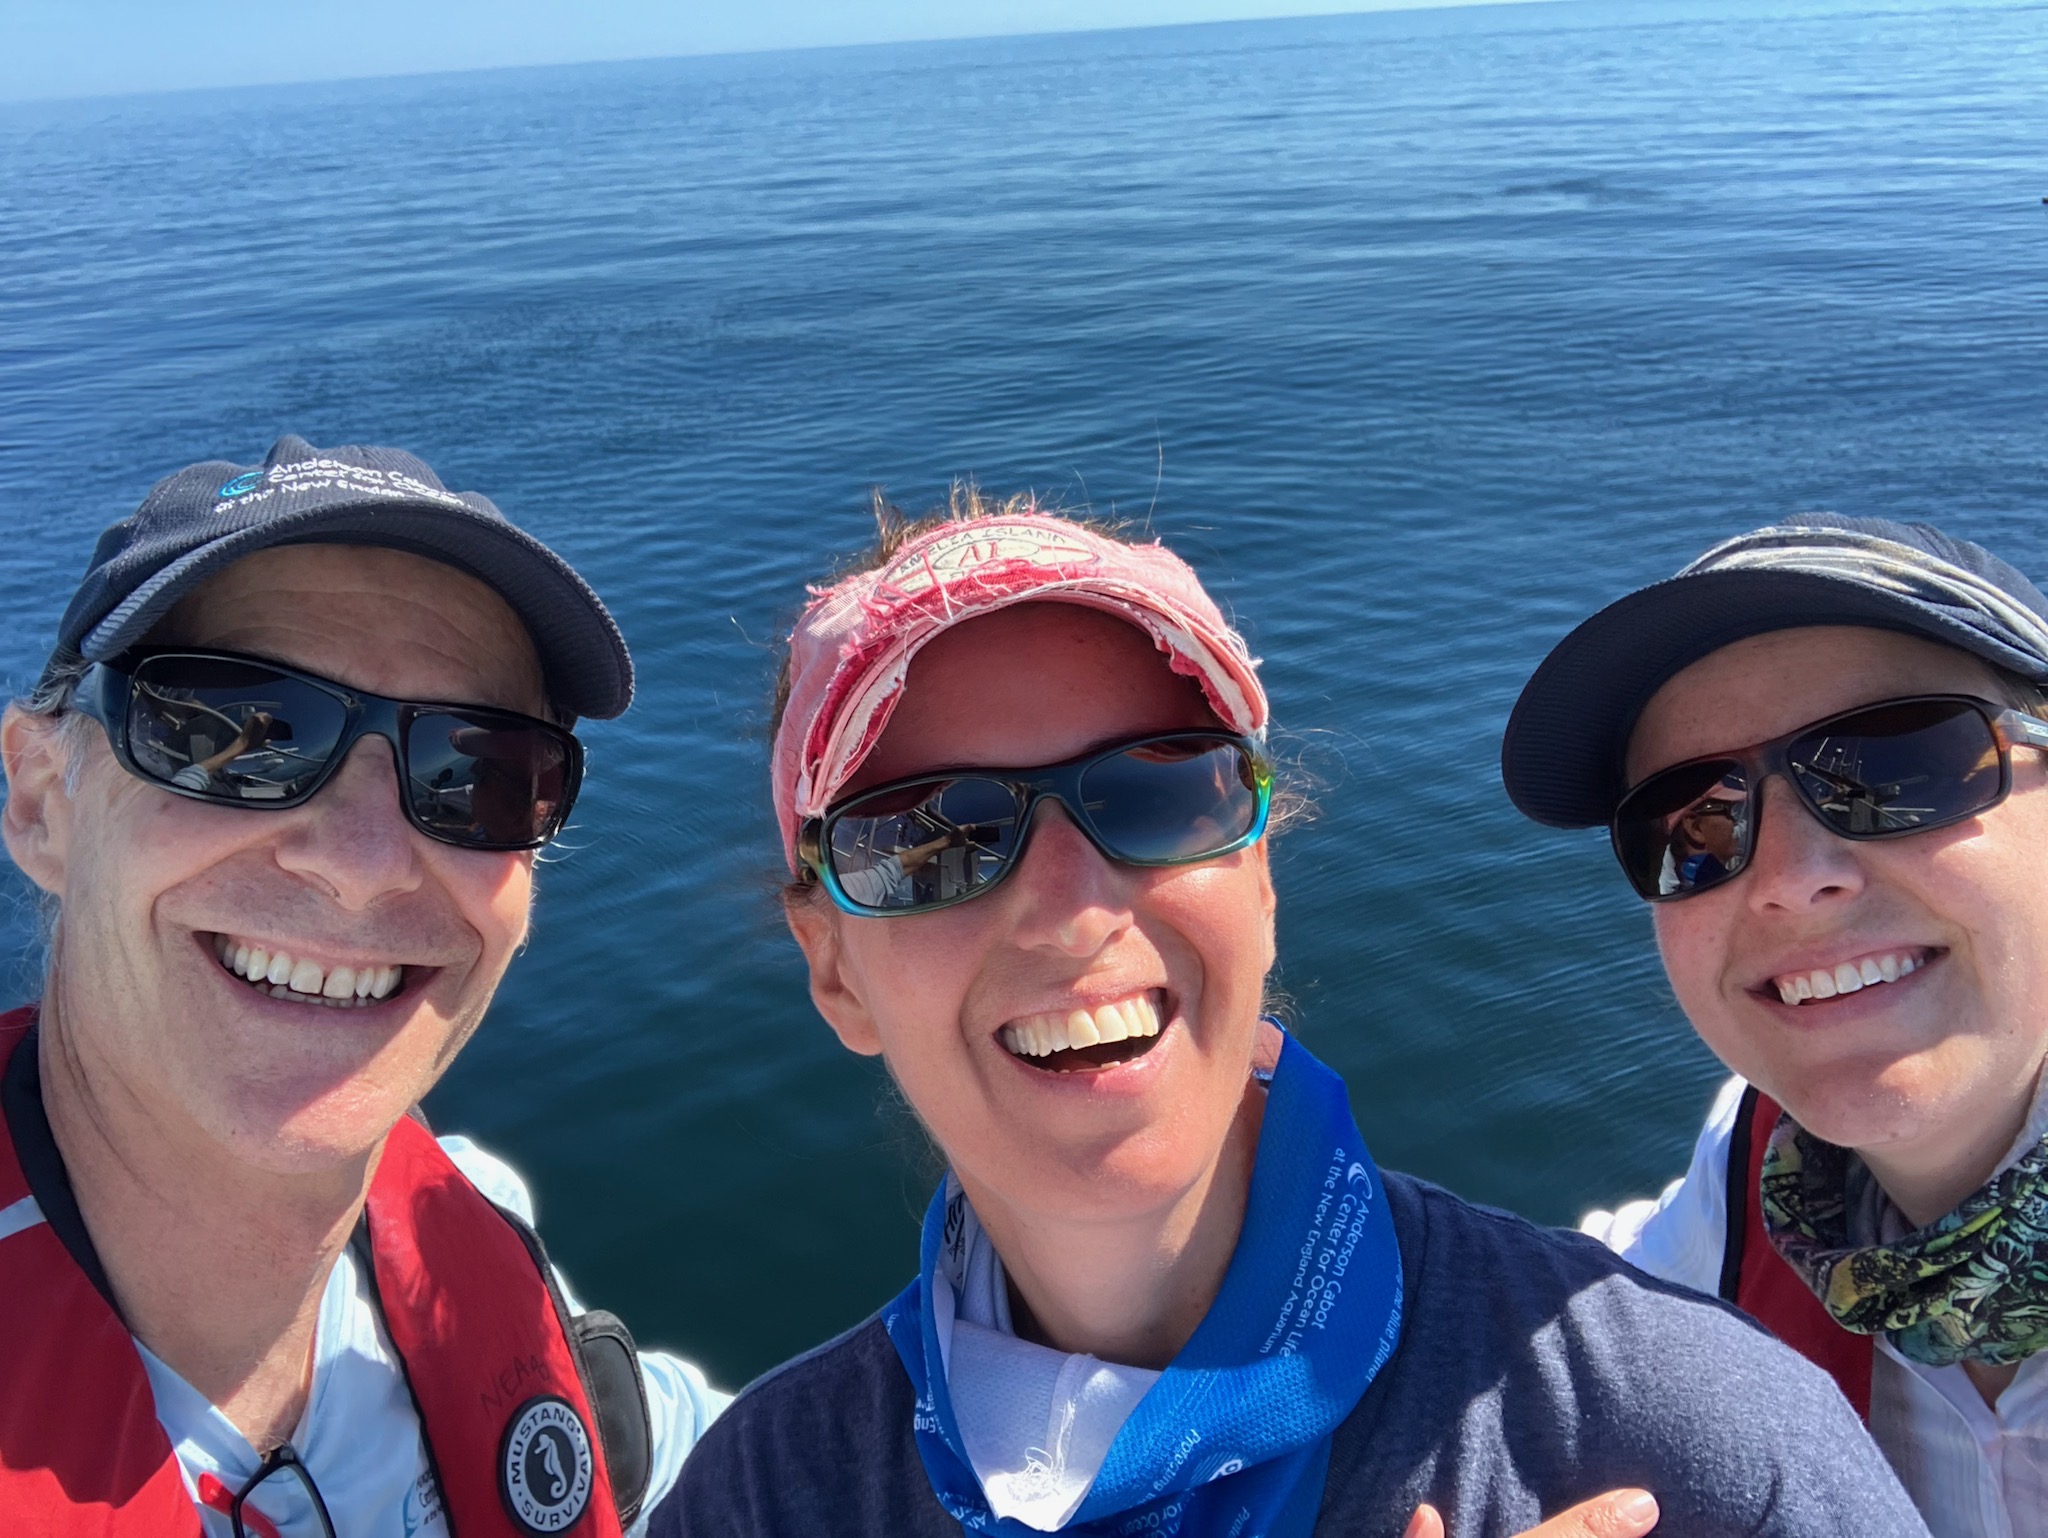 three smiling people wearing sunglasses outside on a boat